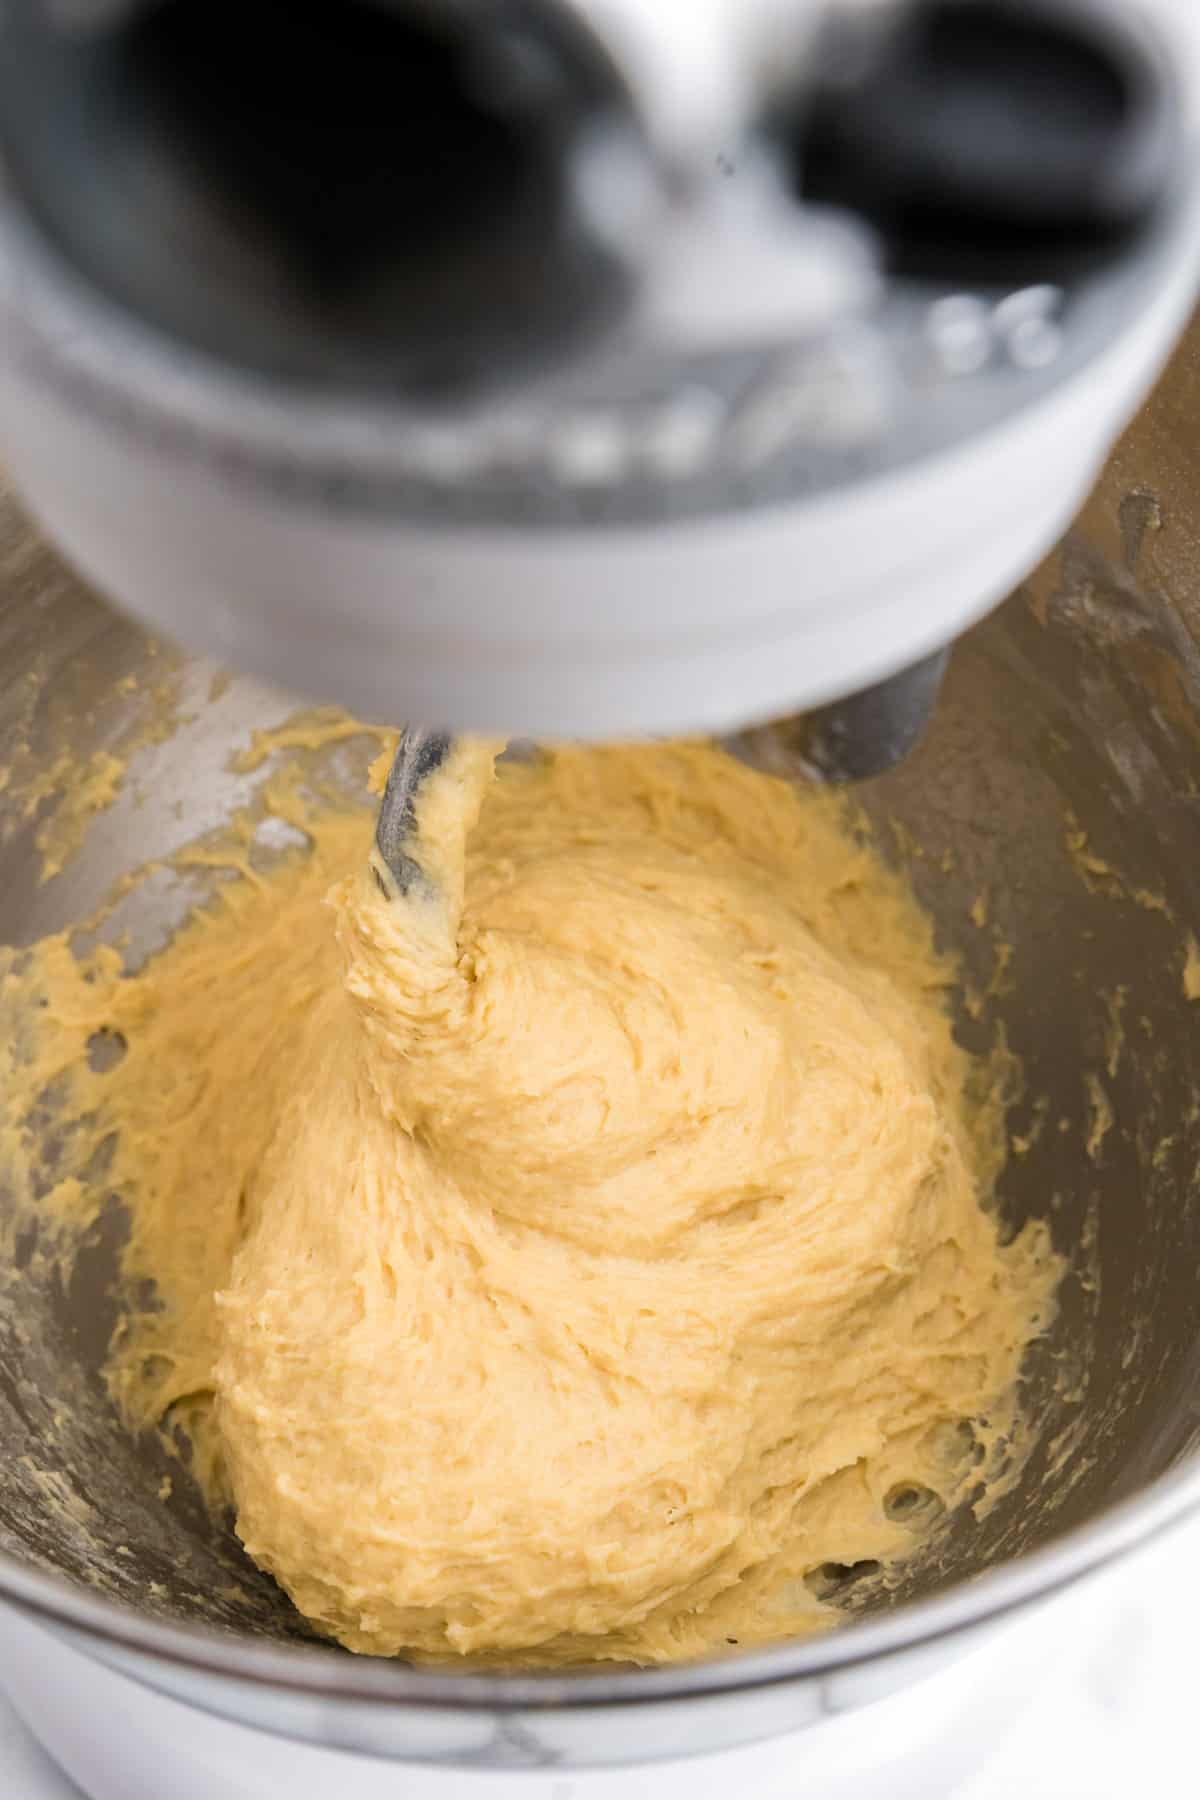 Using dough hook to mix Easter Bread dough in mixing bowl